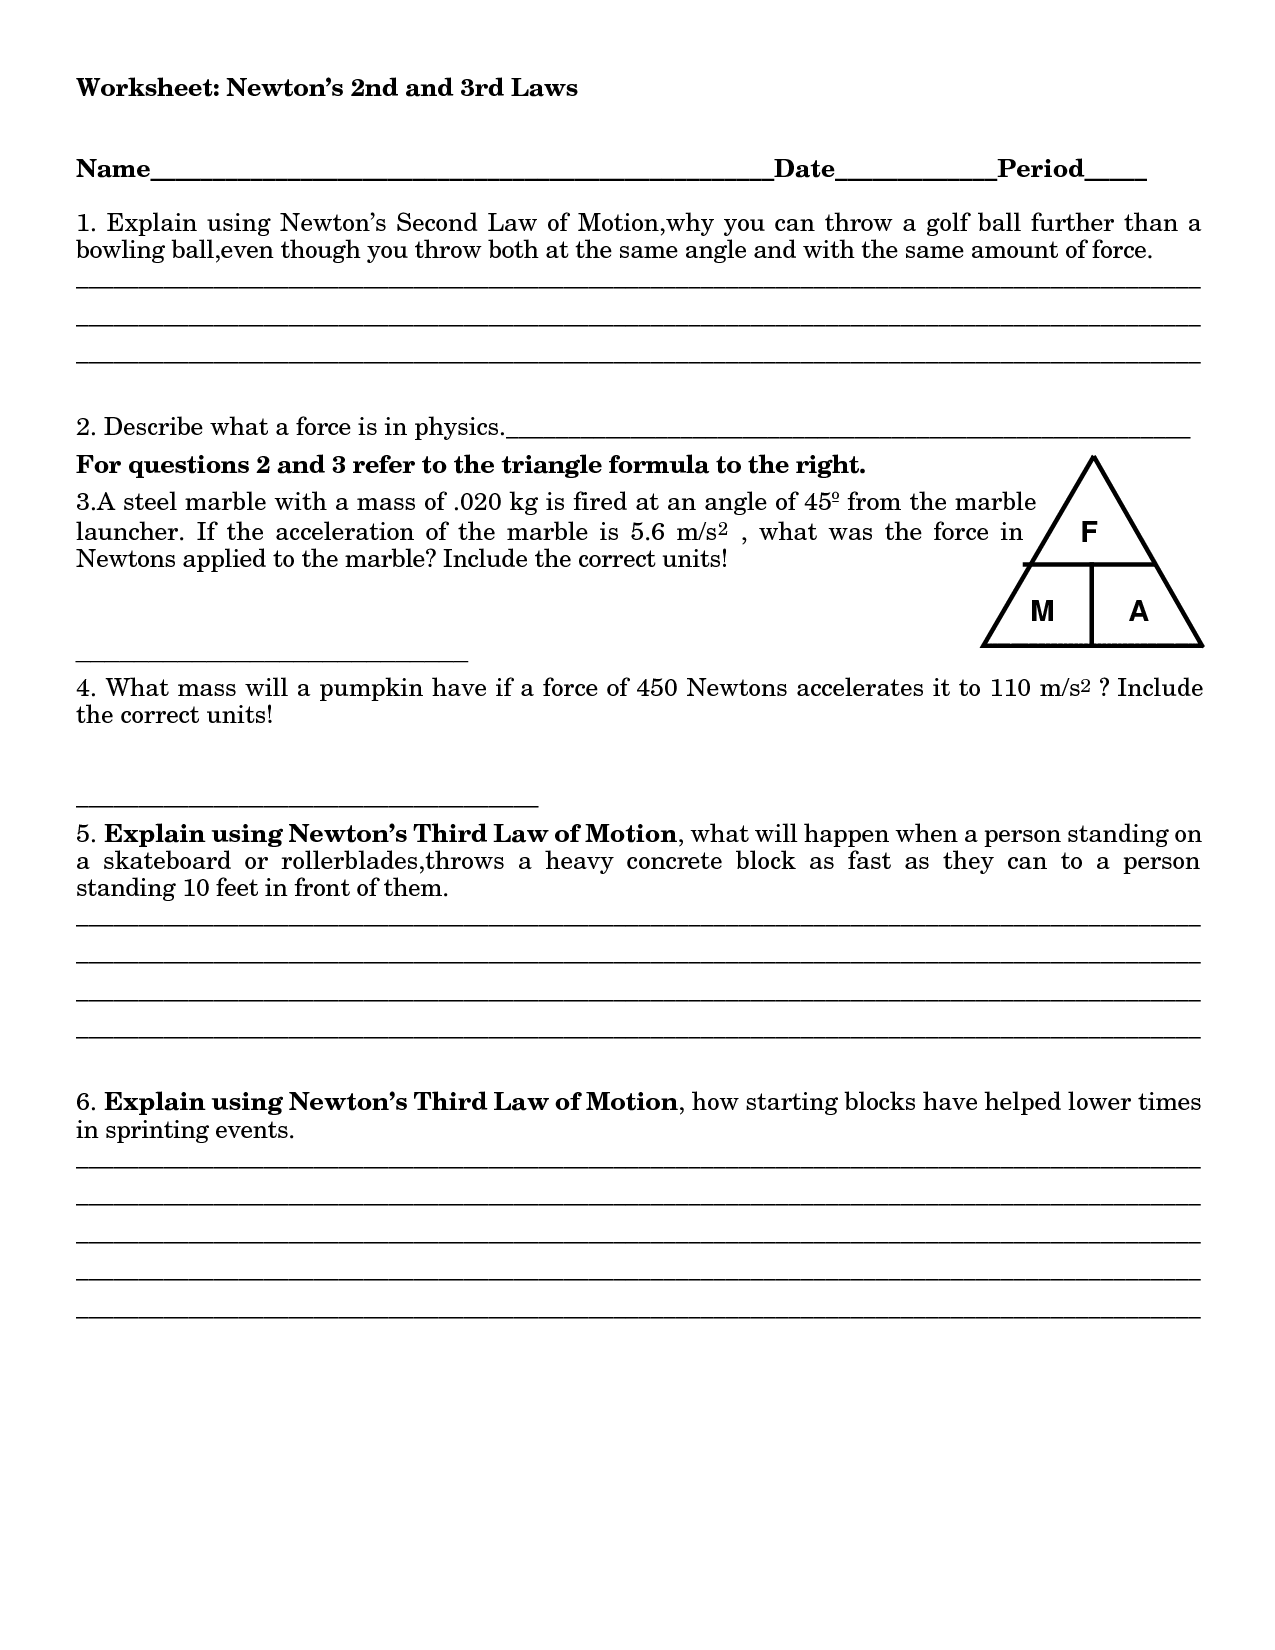 13-best-images-of-newton-s-laws-of-motion-worksheets-free-worksheets-newton-s-laws-newton-s